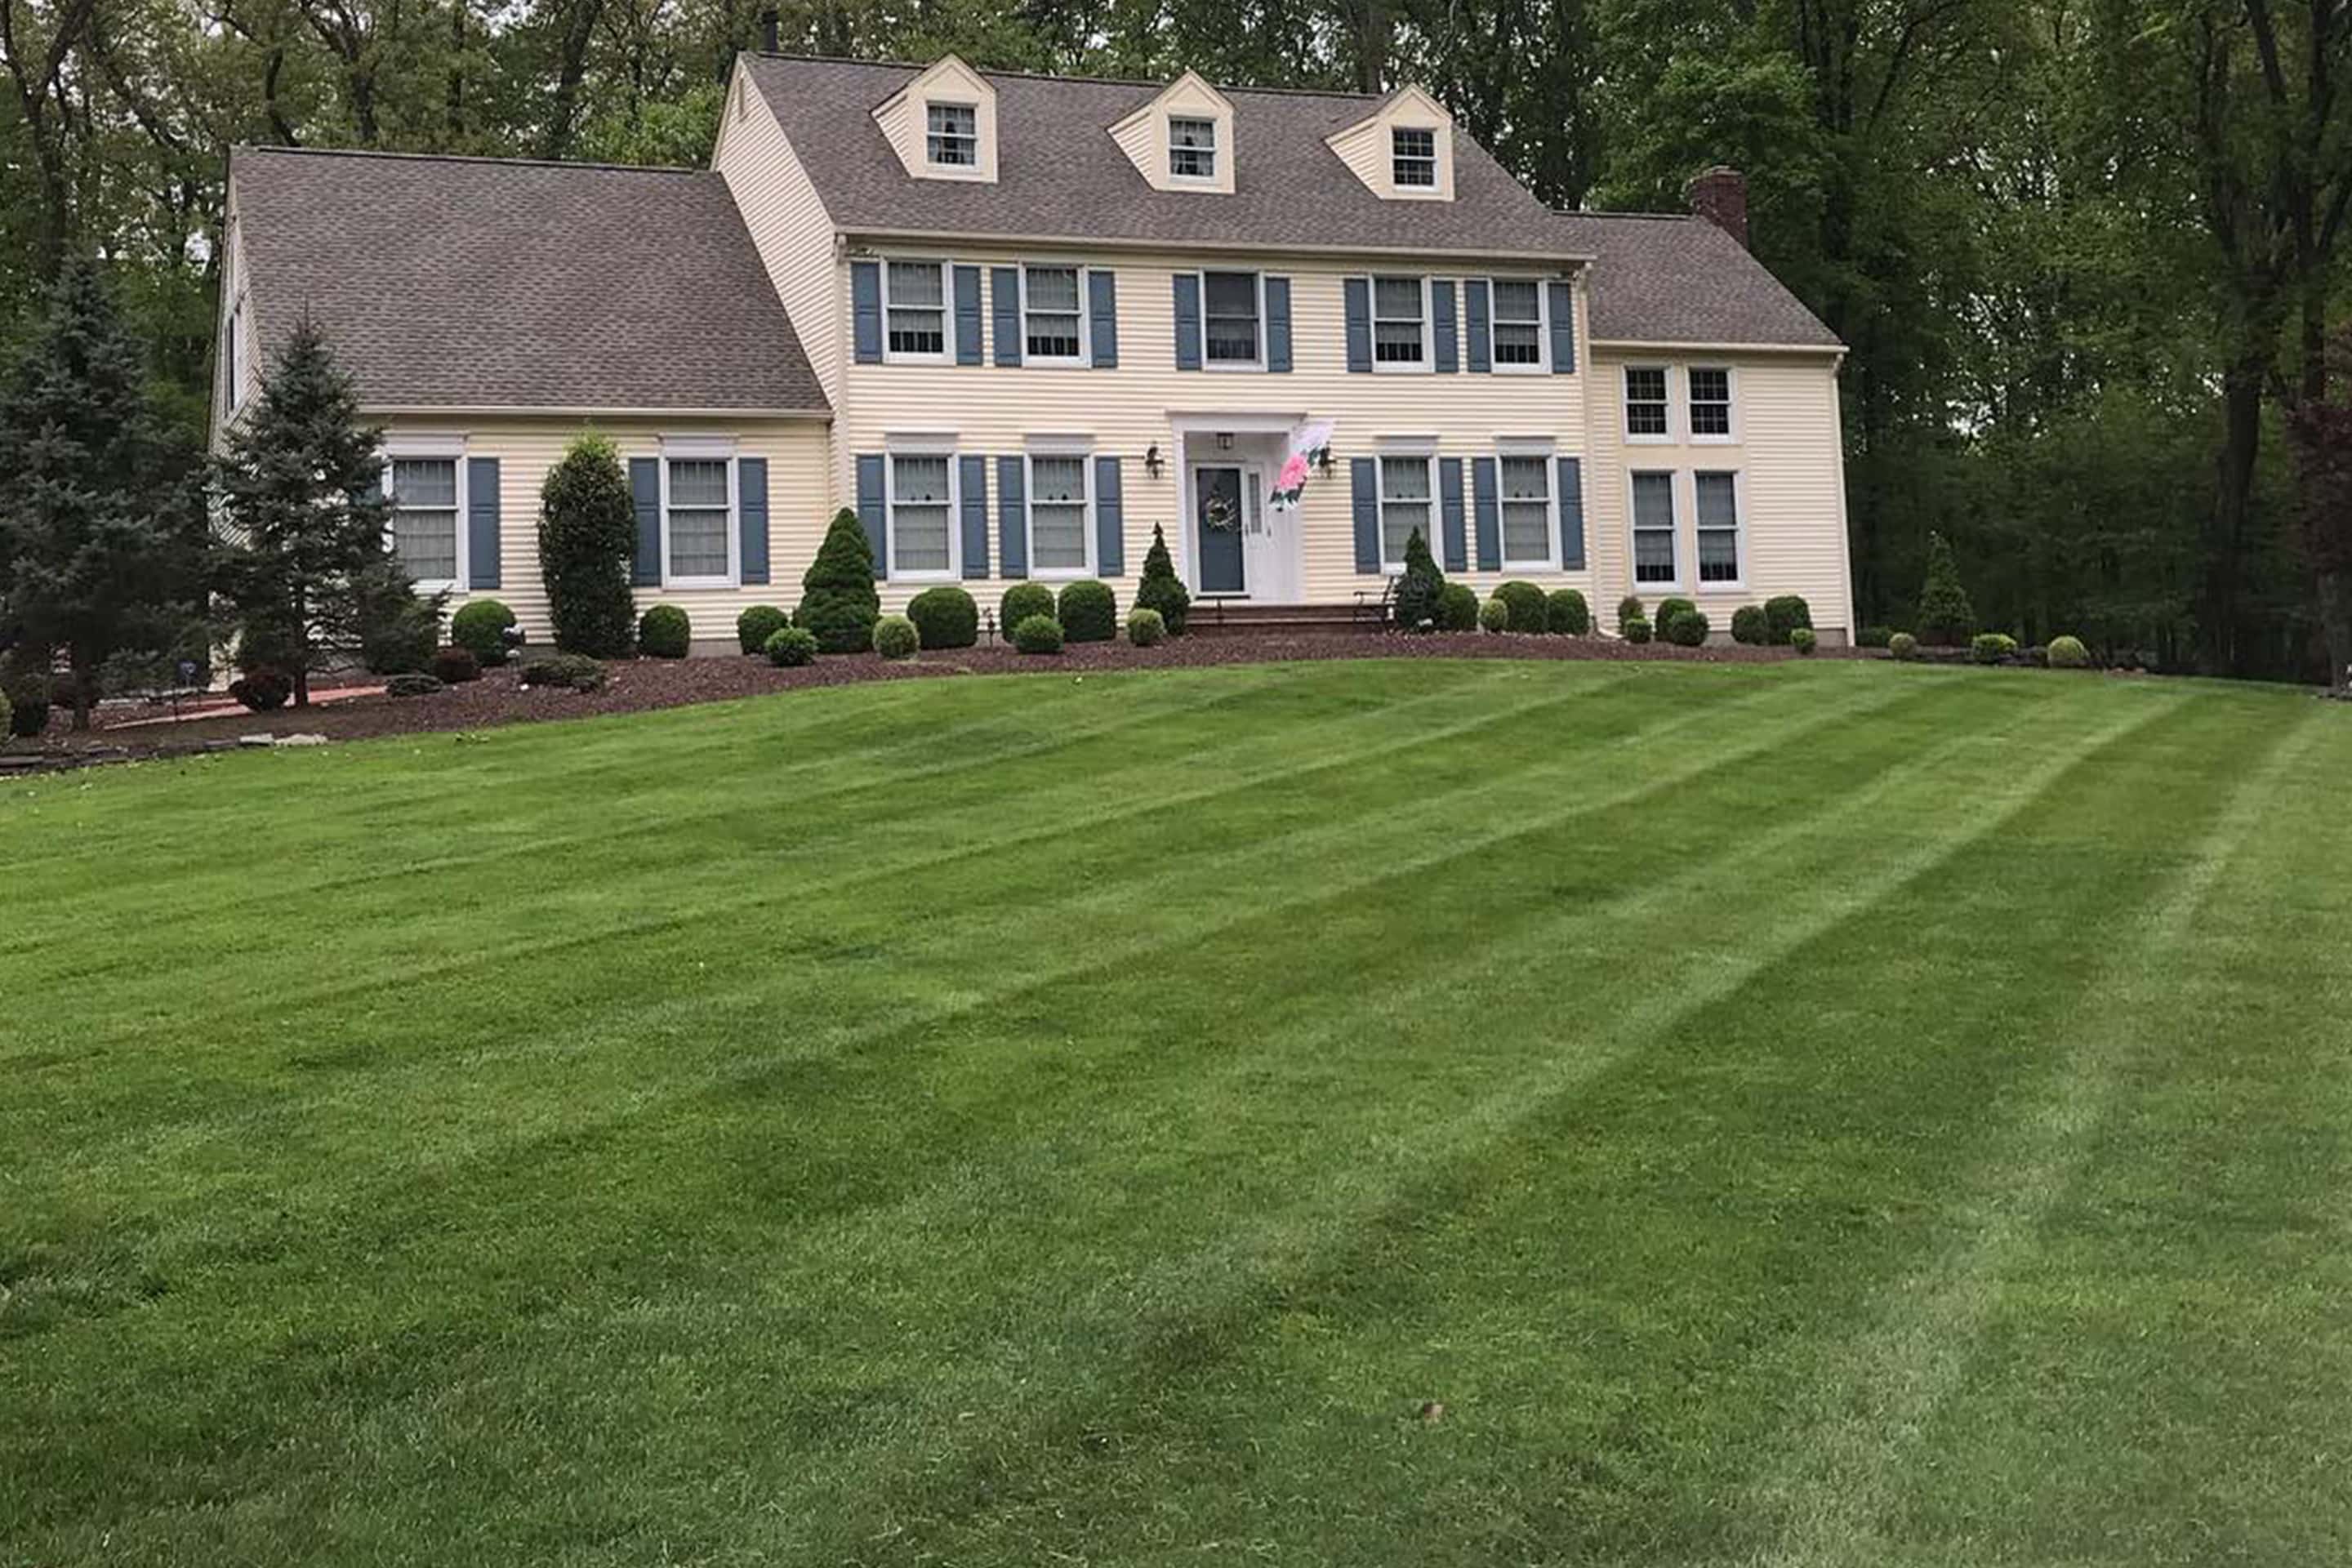 Vision Landscape Services' lawn care and maintenance enhances curb appeal - green lawn accented by a mixture of ornamental shrubs and plants